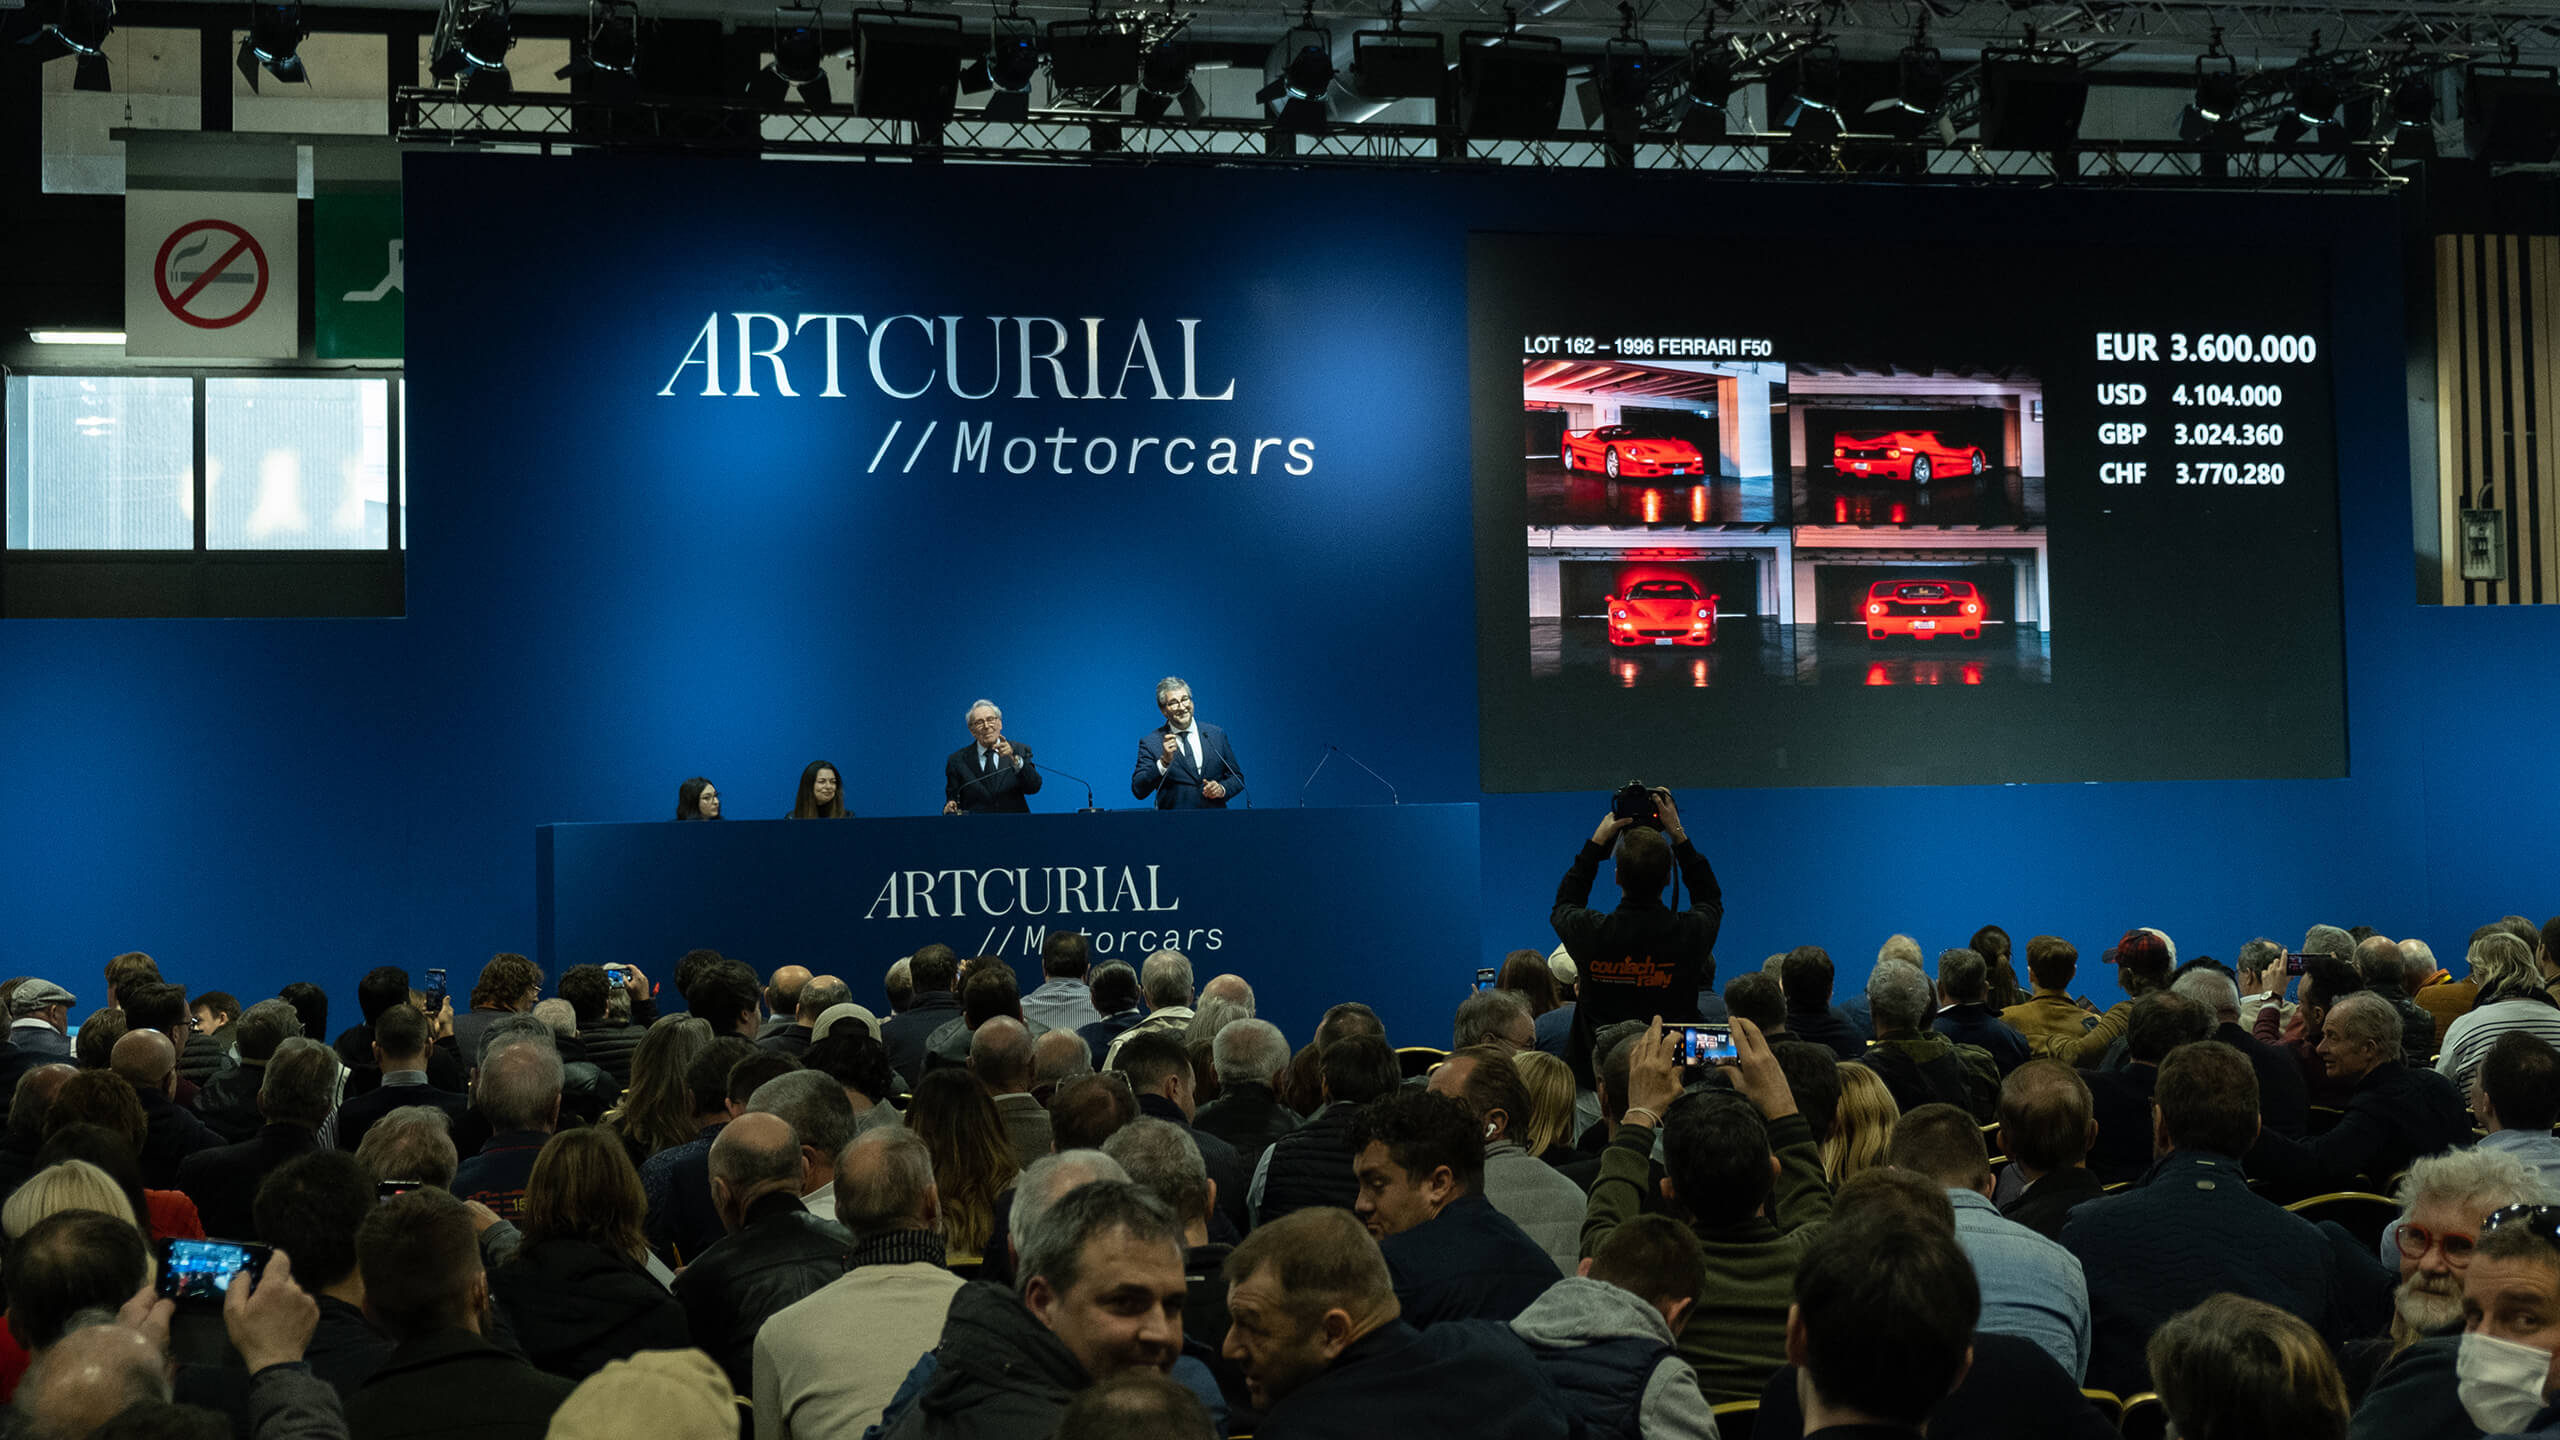 Stop press live from Paris: Artcurial F50 sells for €4.068m